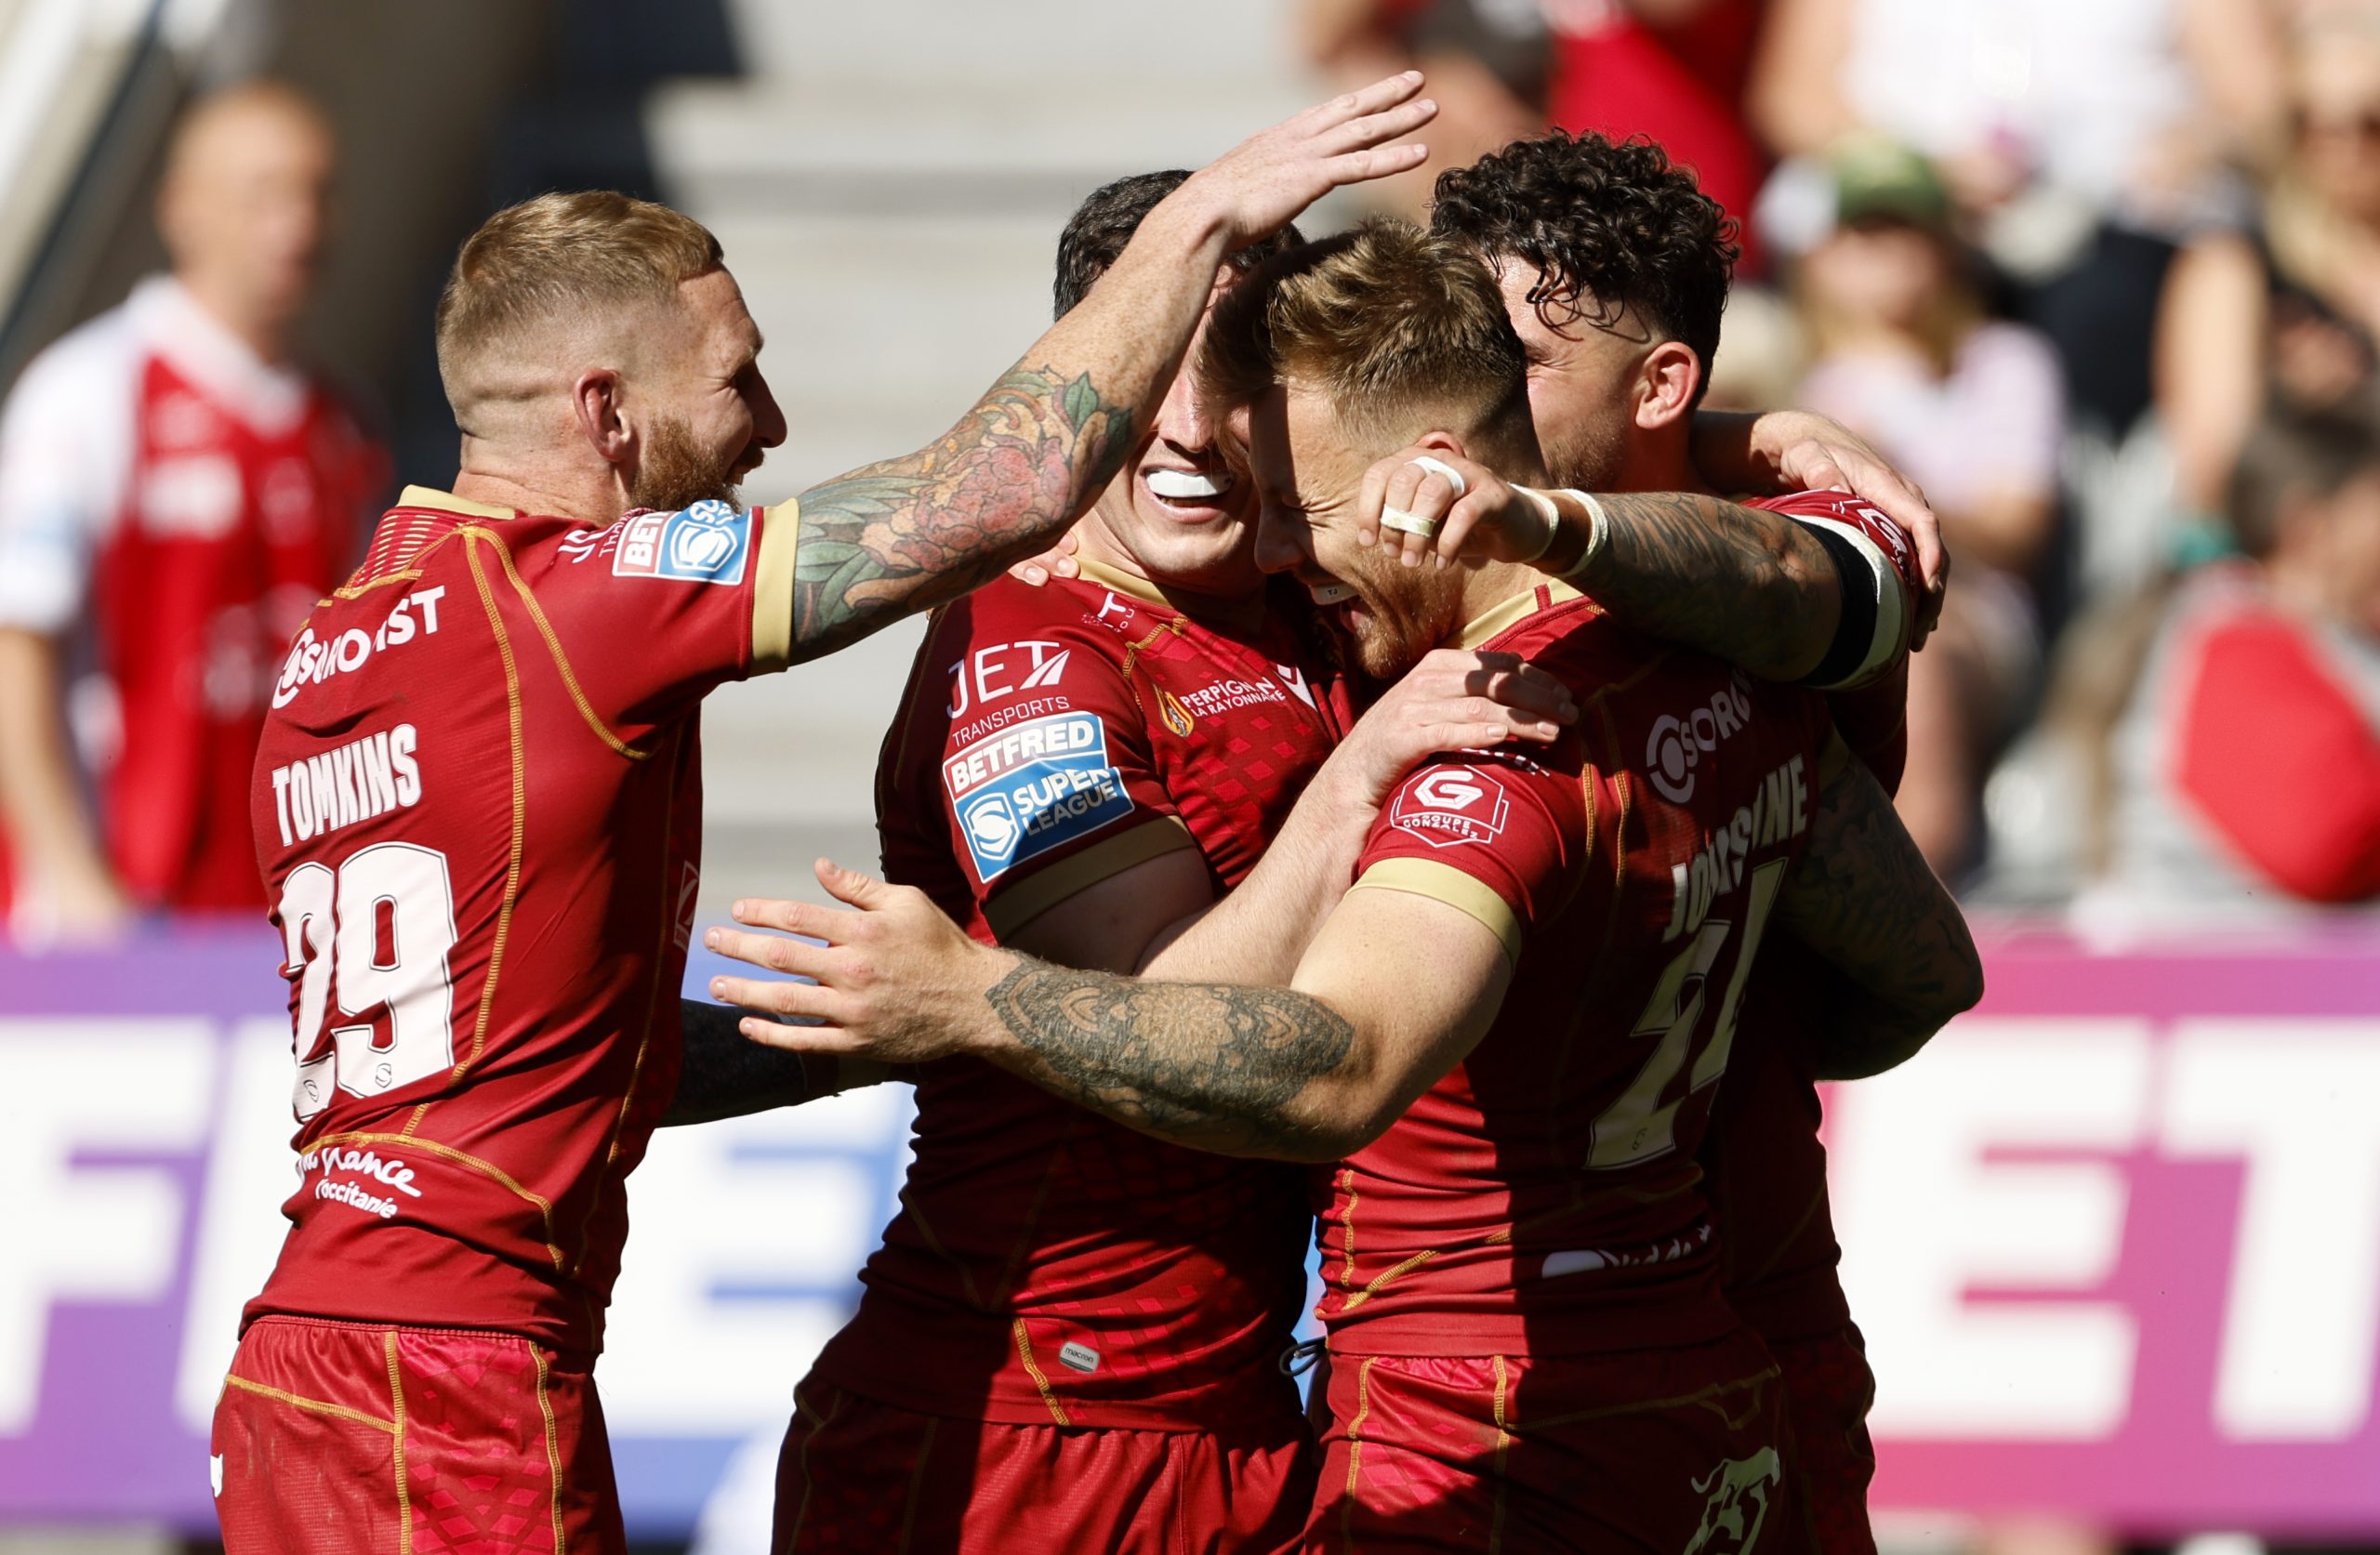 Catalans Dragons and Leigh lead exciting Super League campaign – what comes next